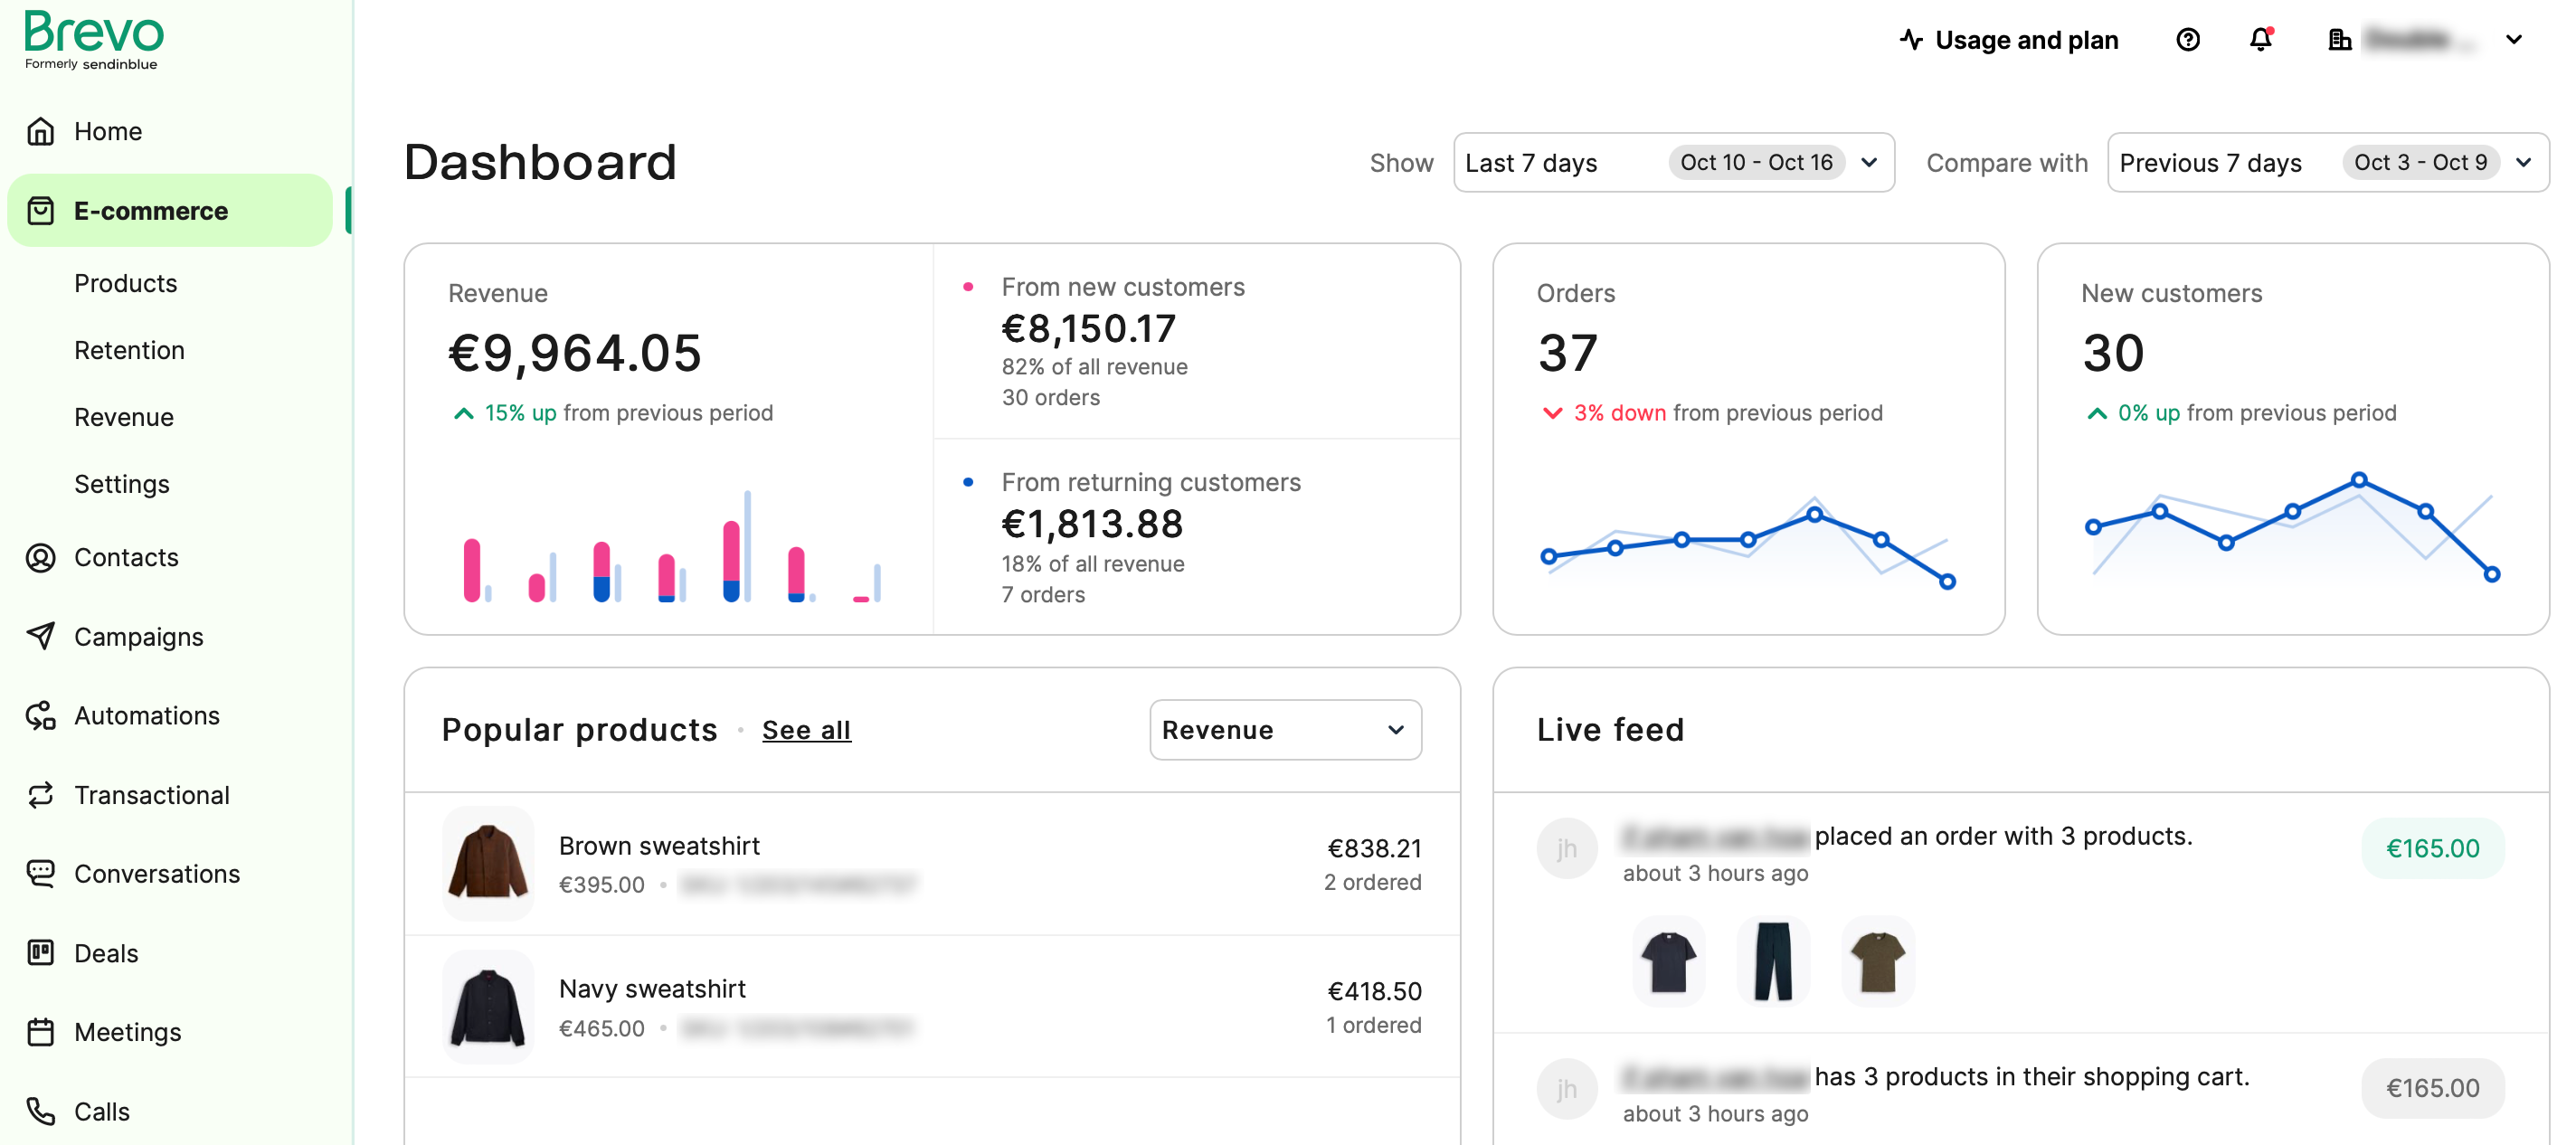 ecommerce_dashboard.png